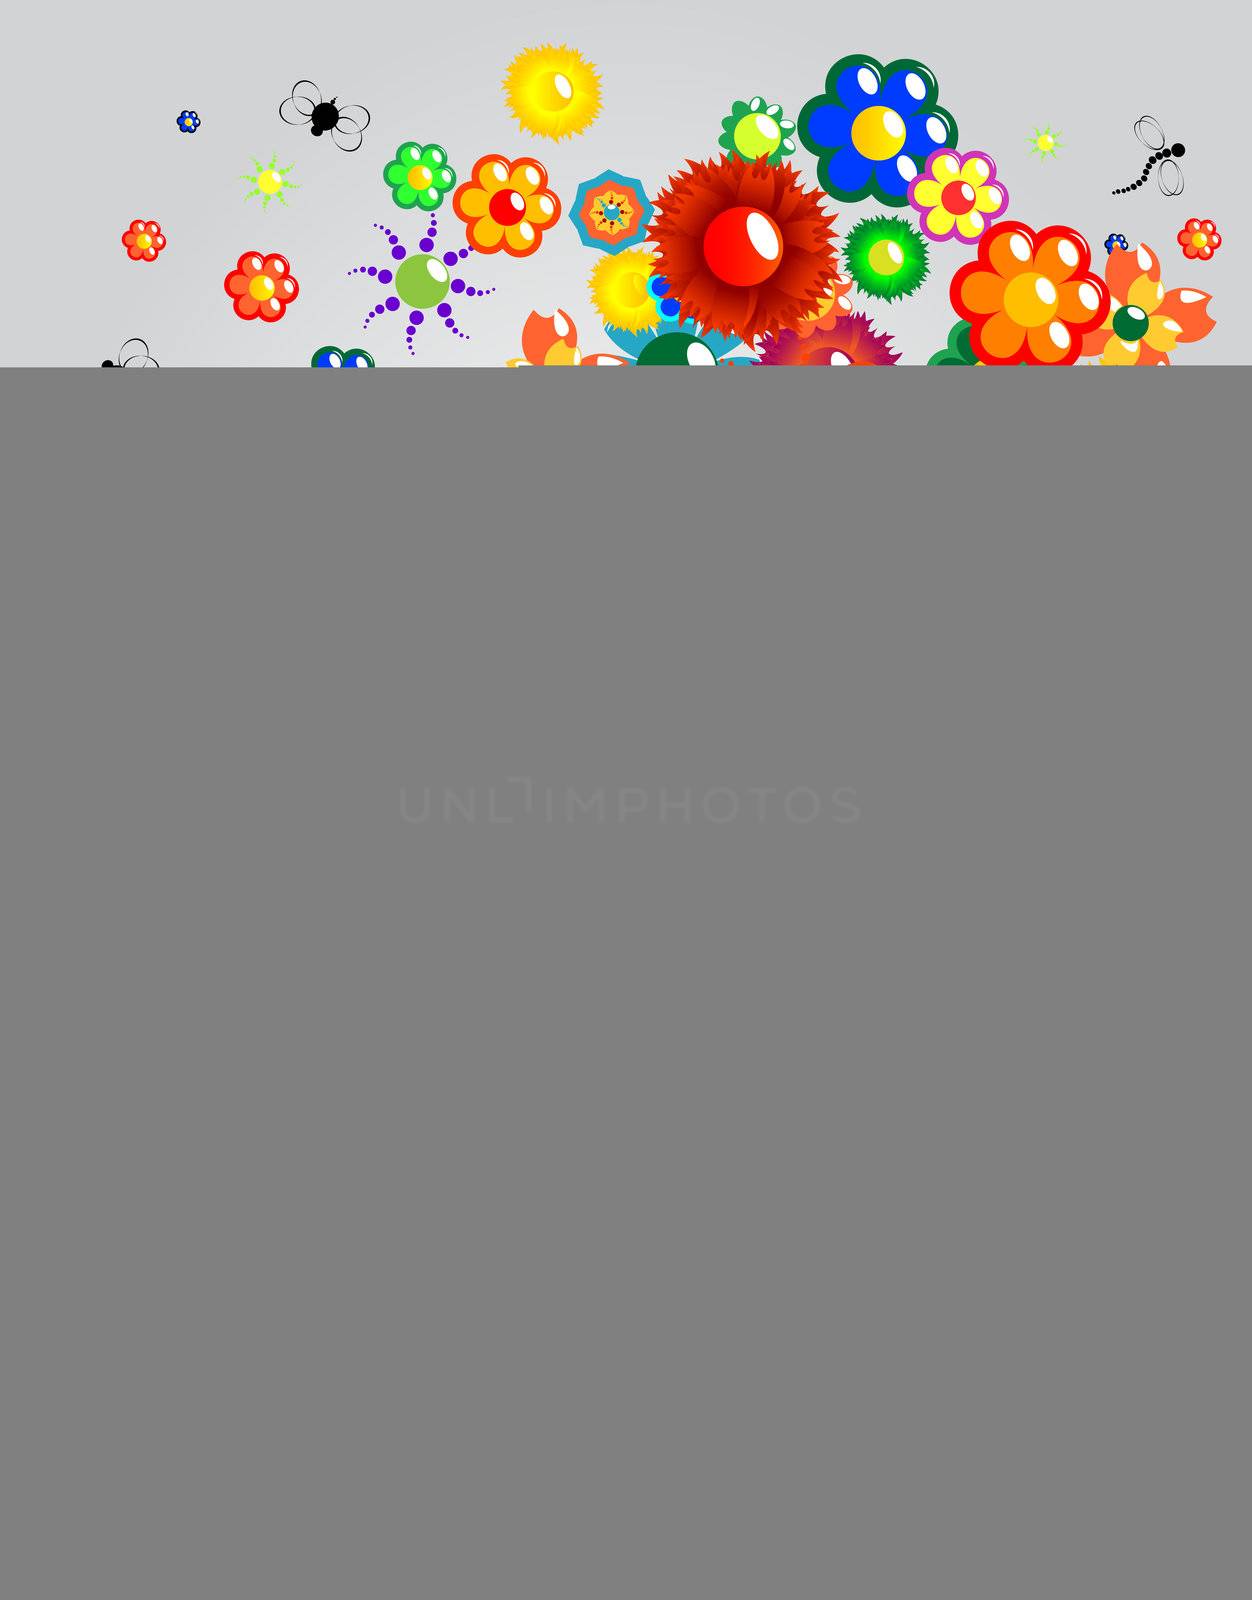 A floral sound, abstract vector background